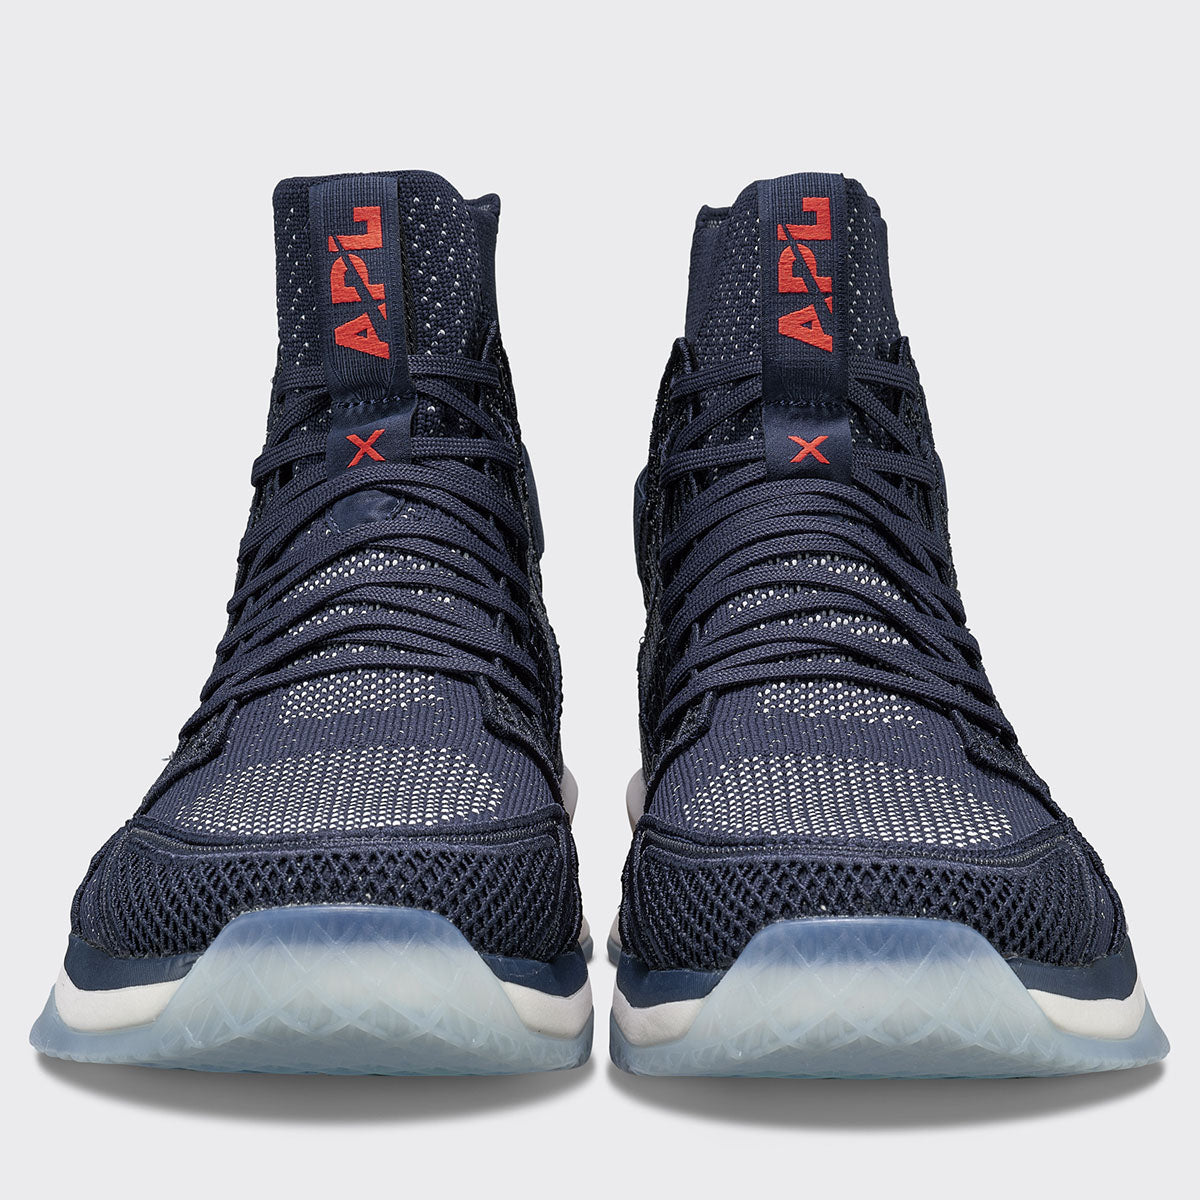 Concept X Navy / White / Impulse Red view 4